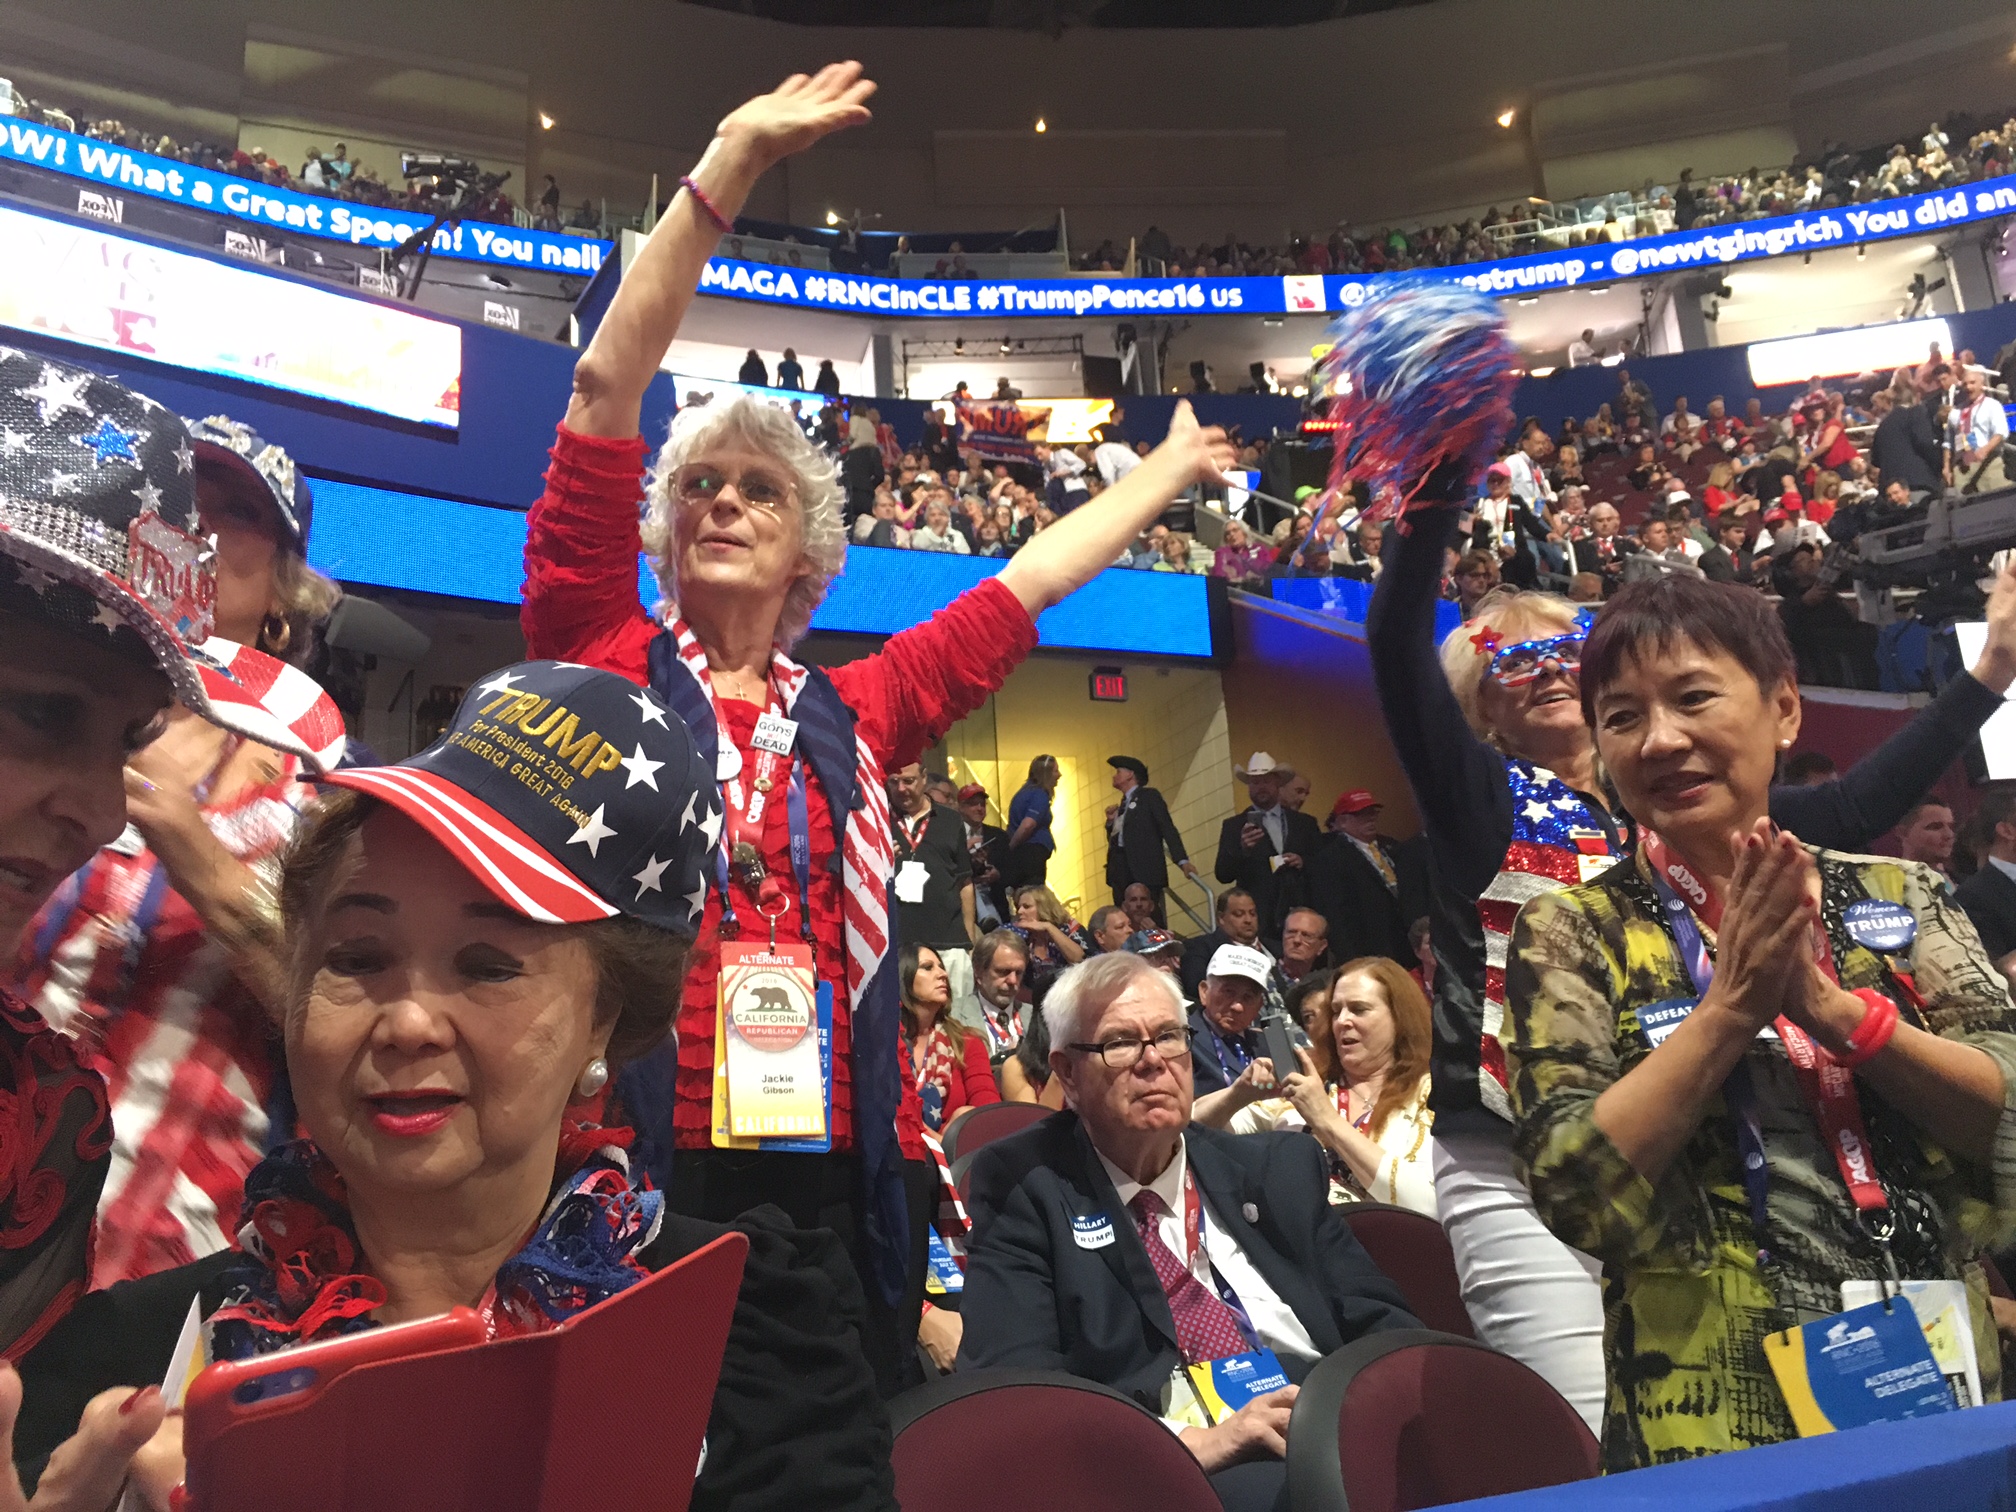 RNC attendees dance to music.